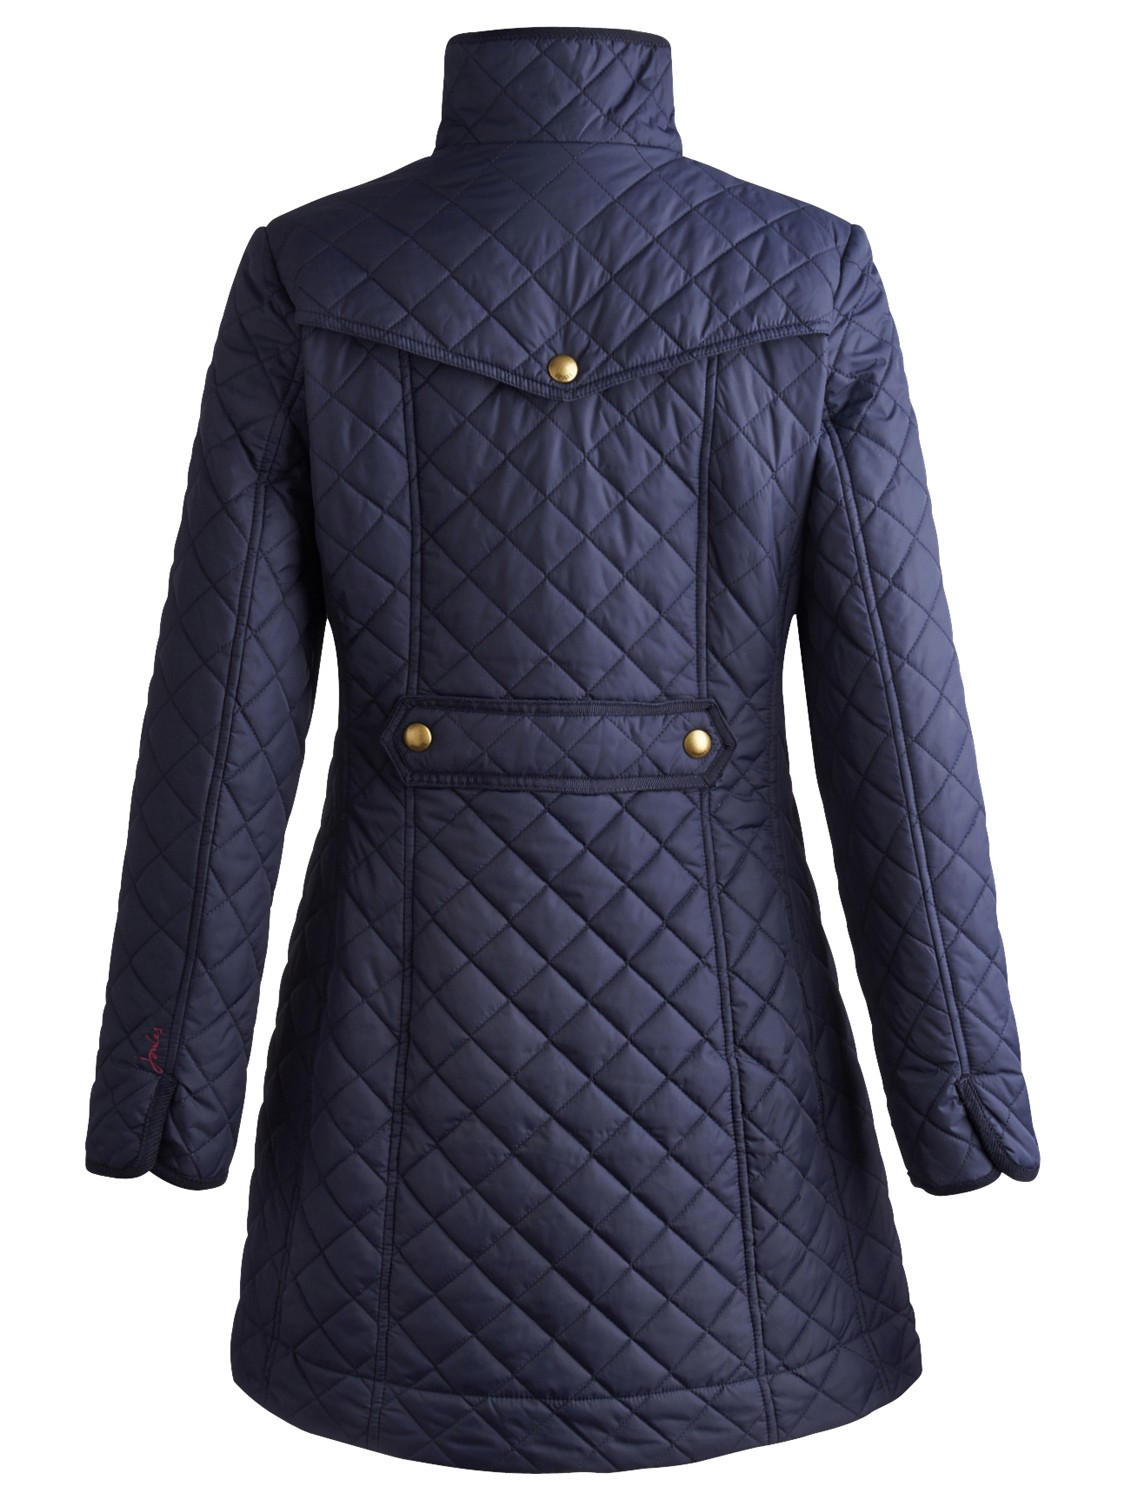 Joules Fairhurst Quilted Jacket in Marine Navy (Blue) - Lyst